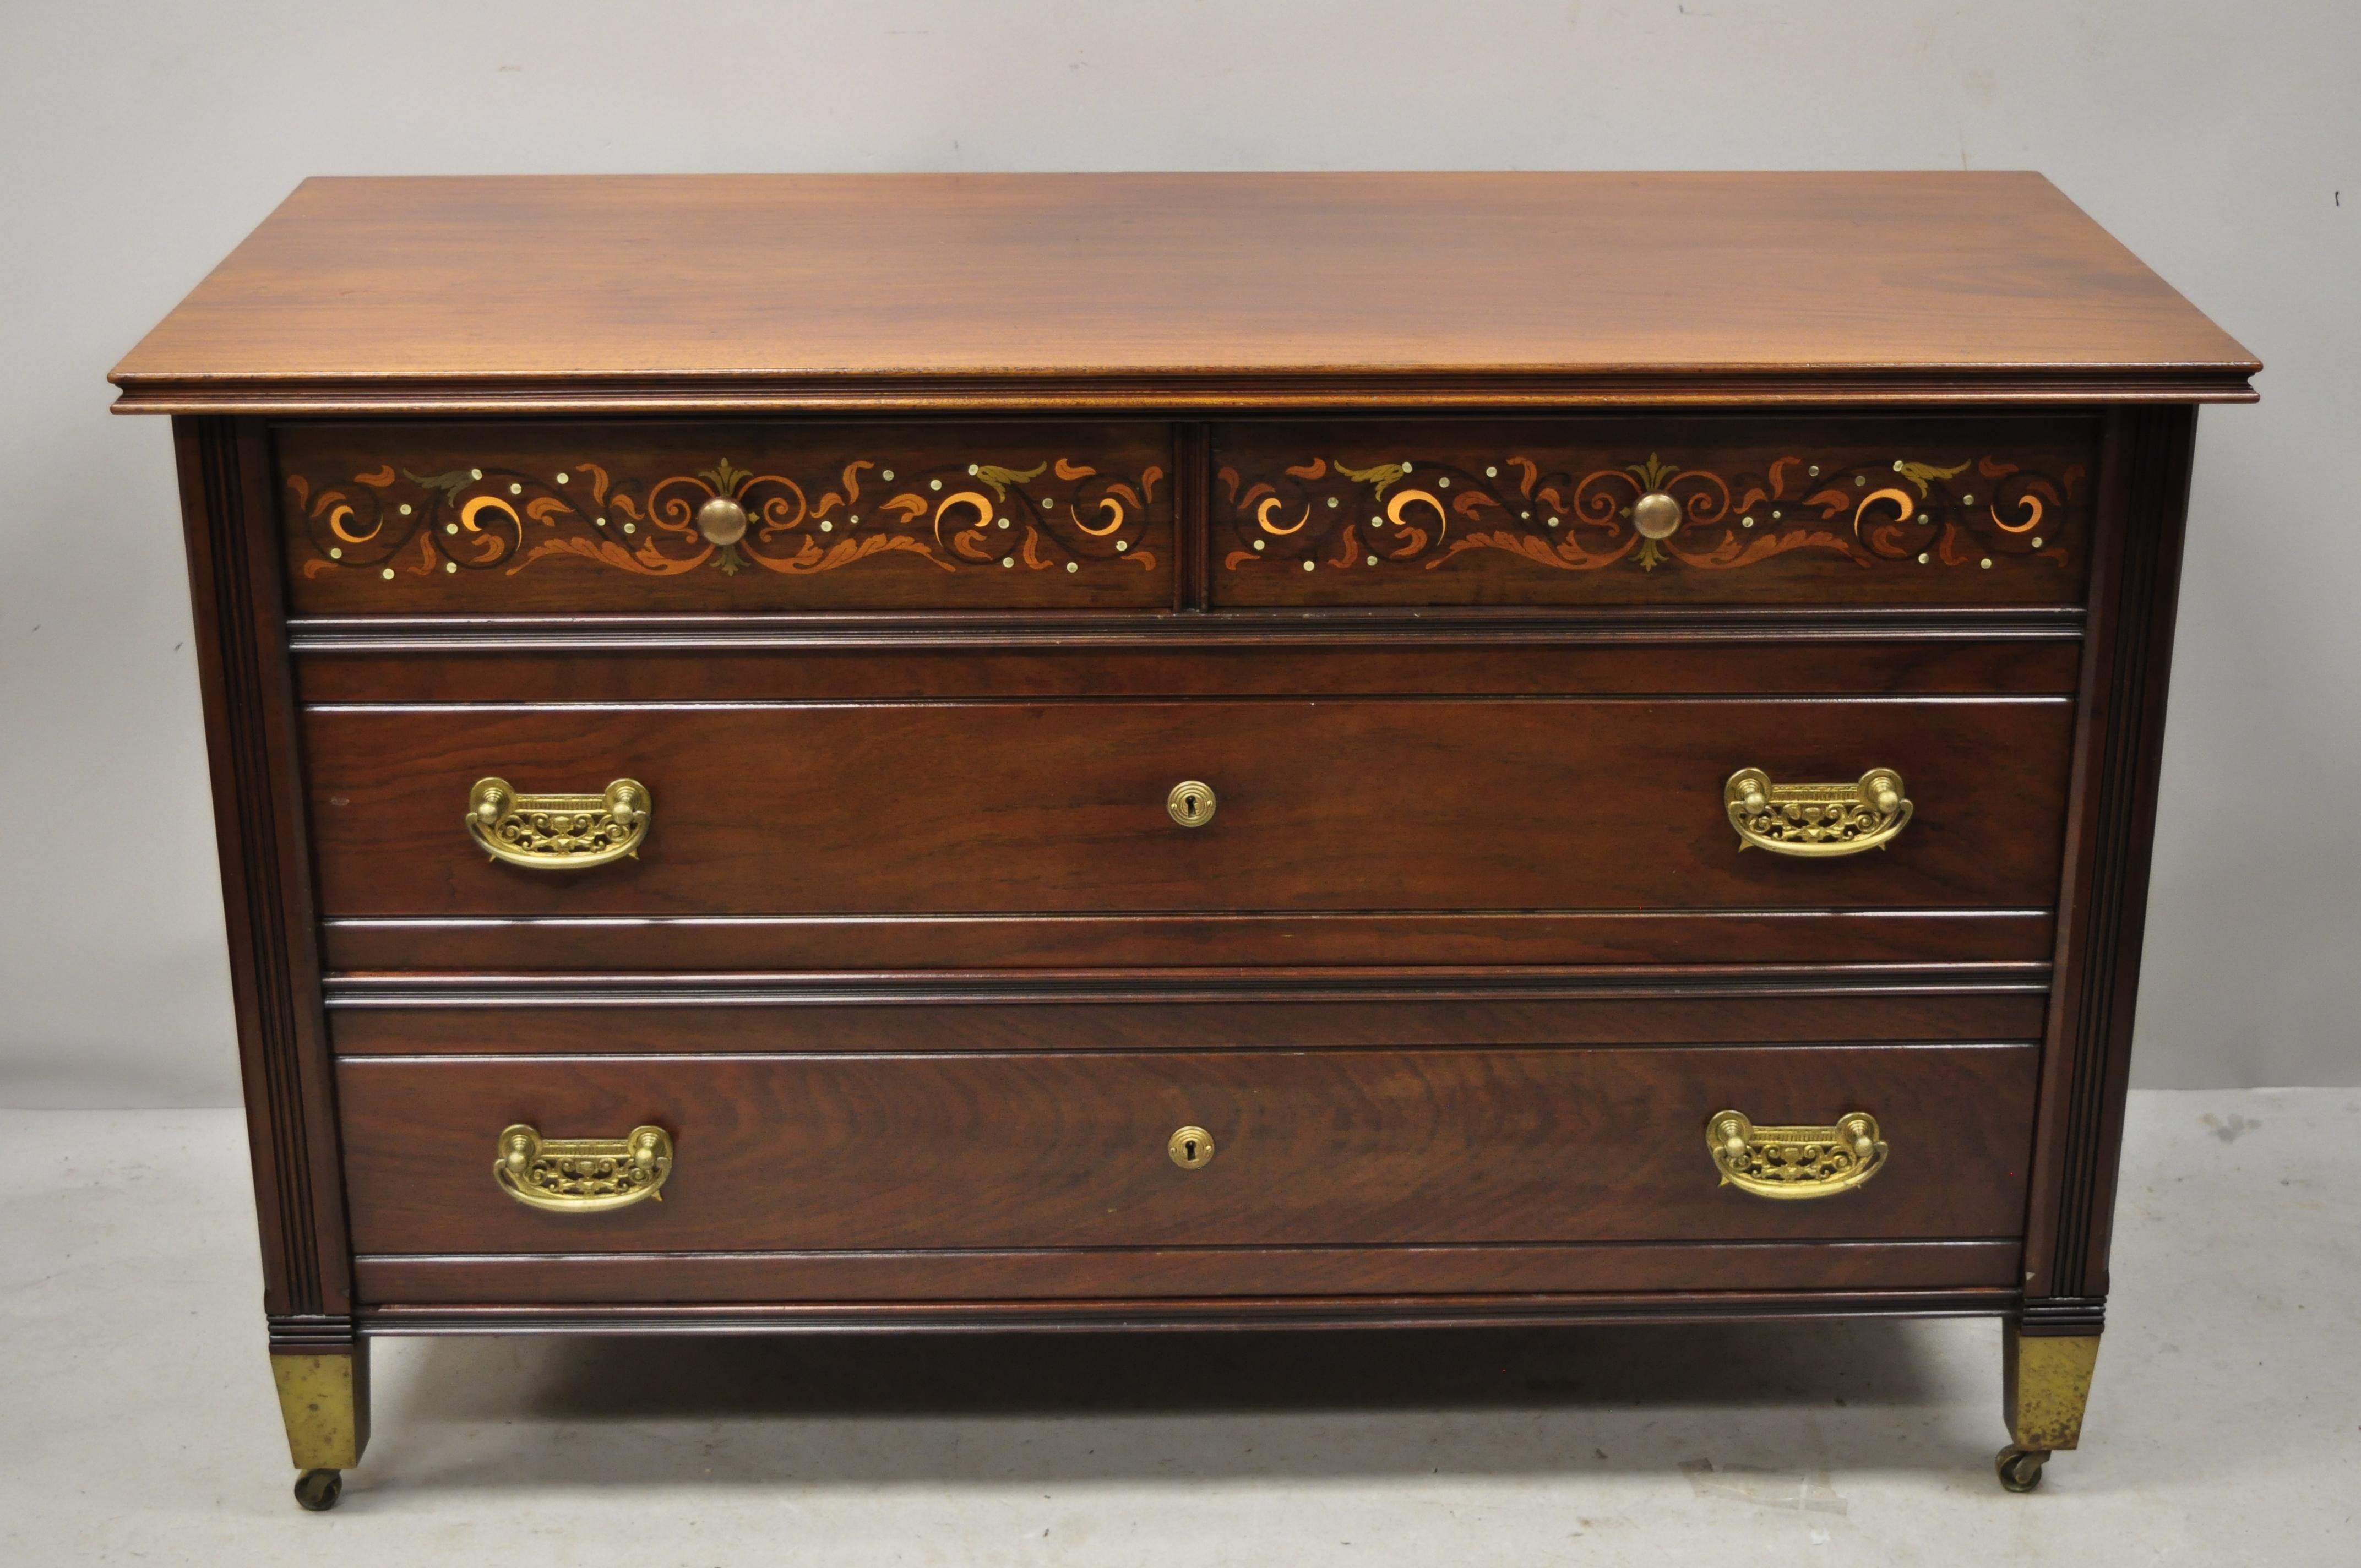 Antique Herts Brothers Edwardian Bronze & Satinwood Inlay Mahogany Chest Dresser For Sale 6